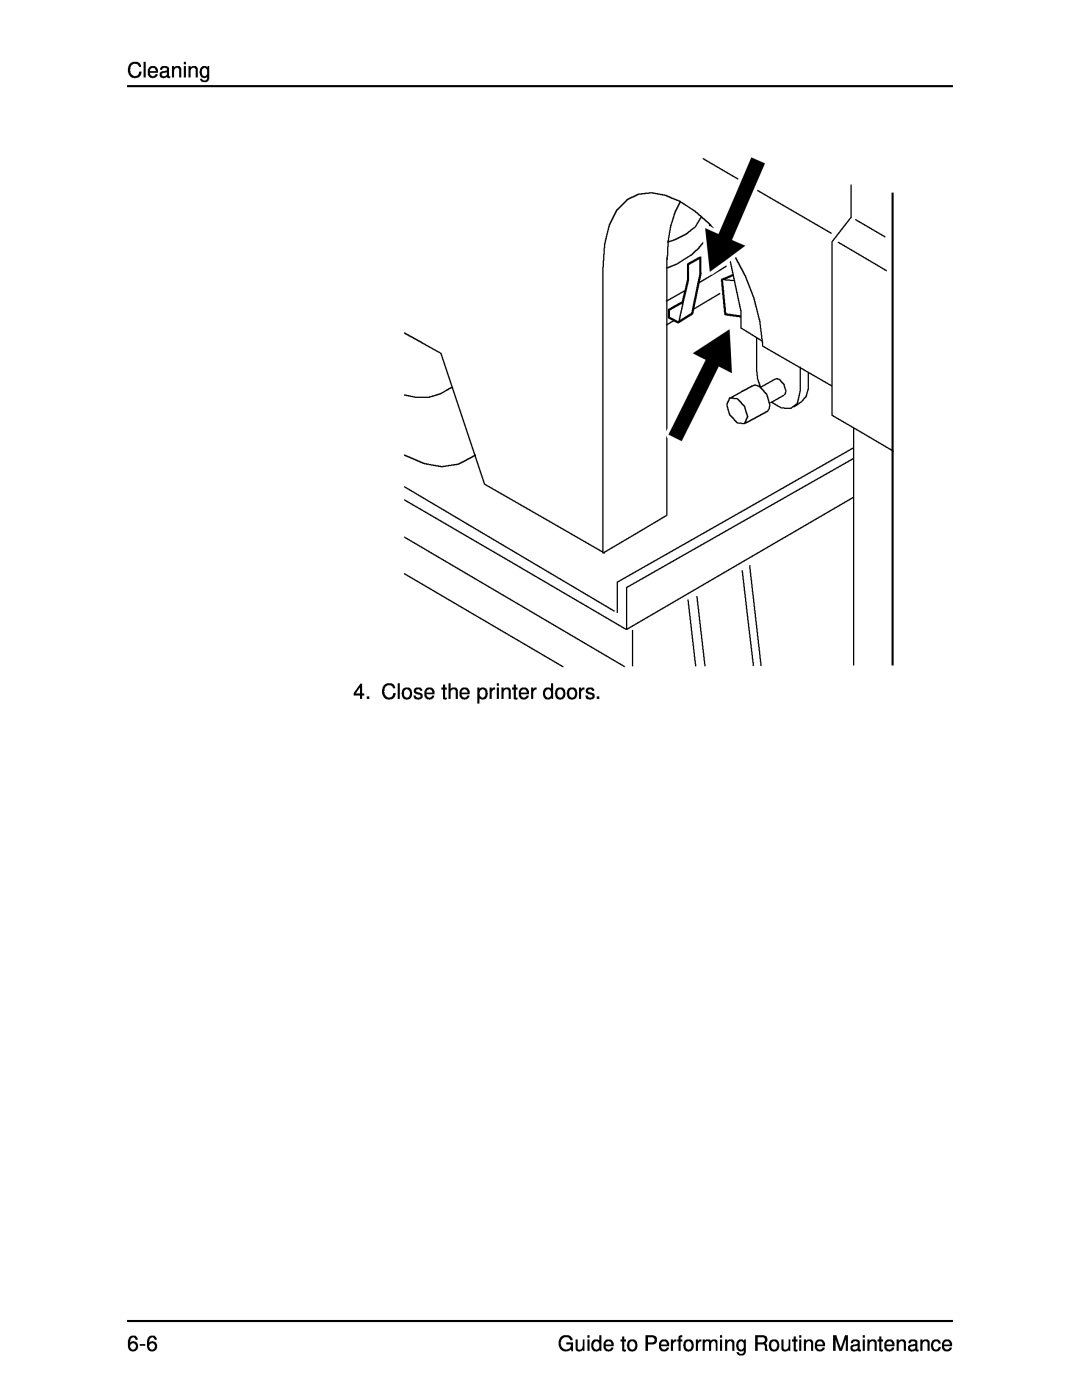 Xerox DocuPrint 96 manual Cleaning, Close the printer doors, Guide to Performing Routine Maintenance 